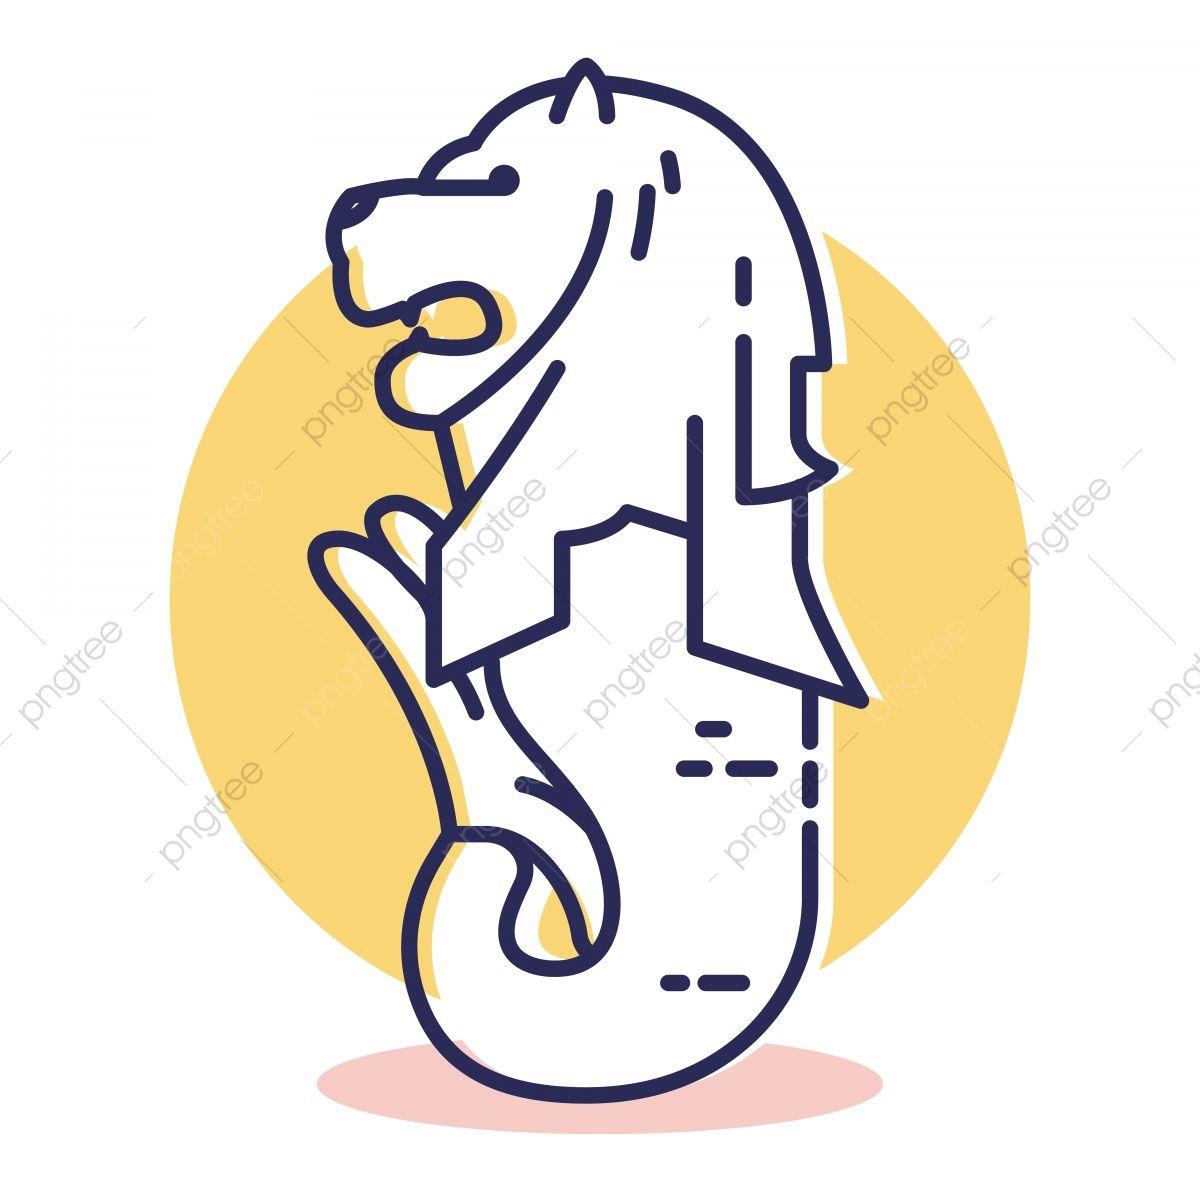 Merlion Logo - Travel And Destination Singapore Merlion Icon With Outline Style